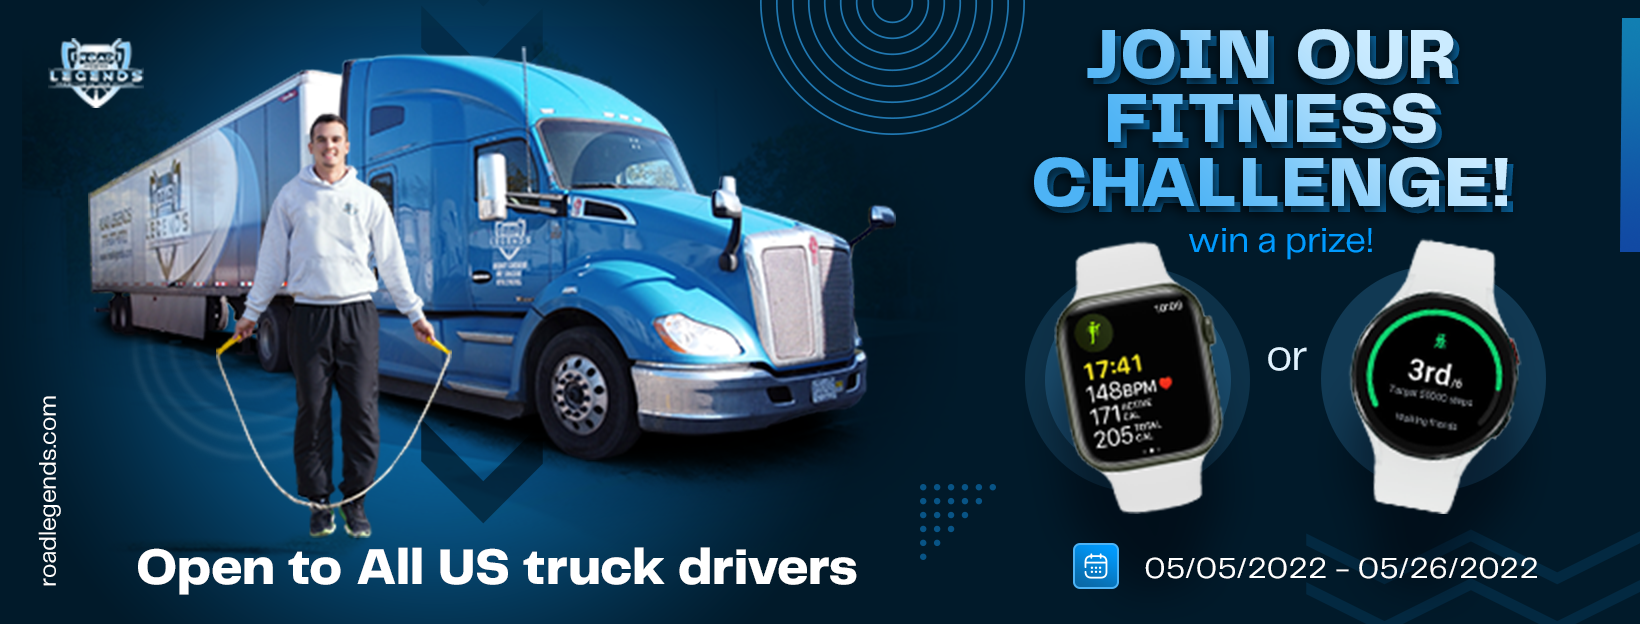 Fitness Challenge: Helping Truckers Stay Healthy